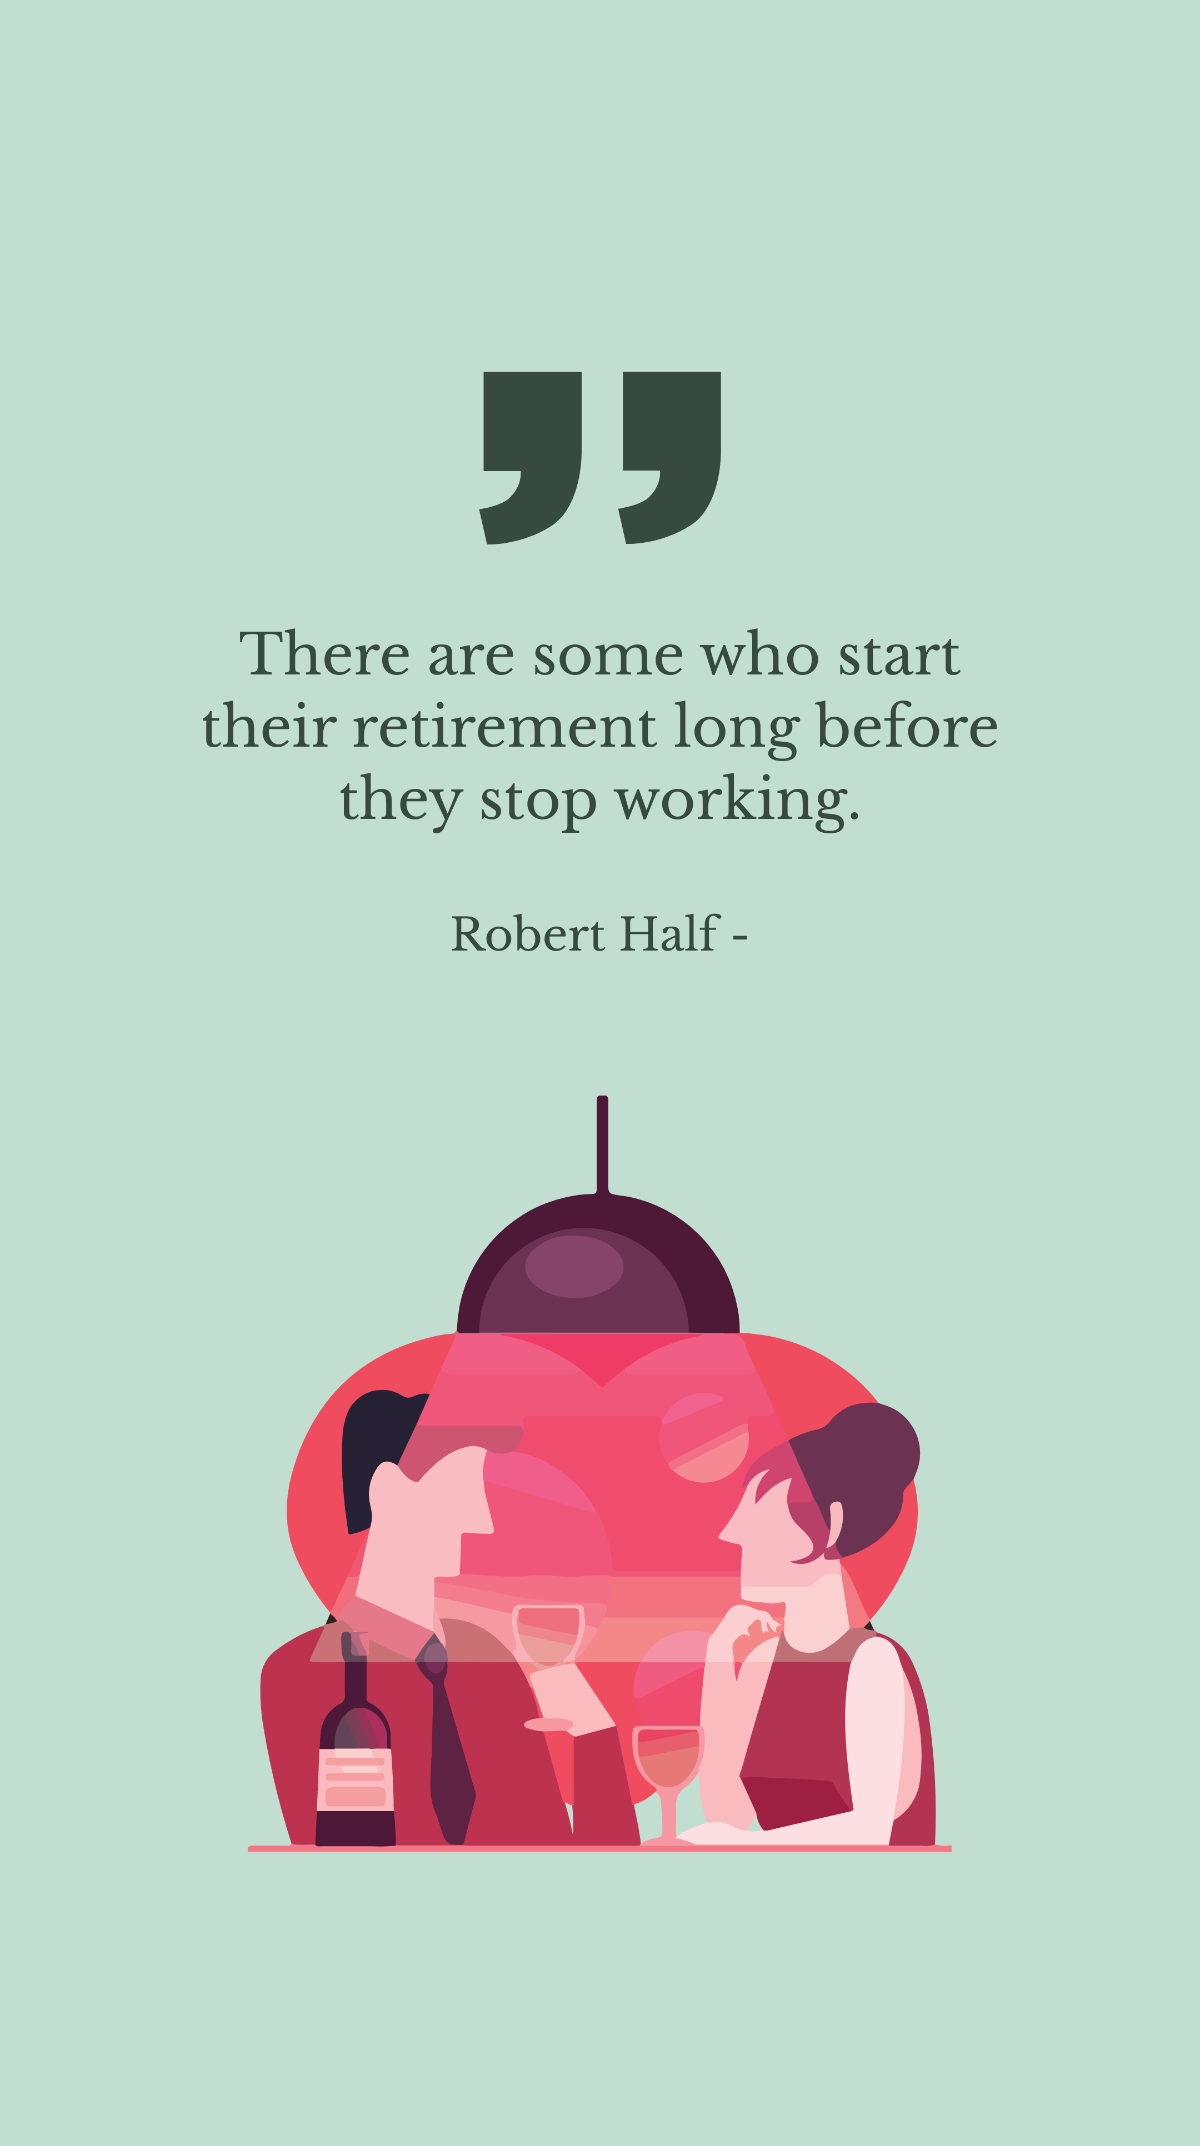 Robert Half - There are some who start their retirement long before they stop working. Template